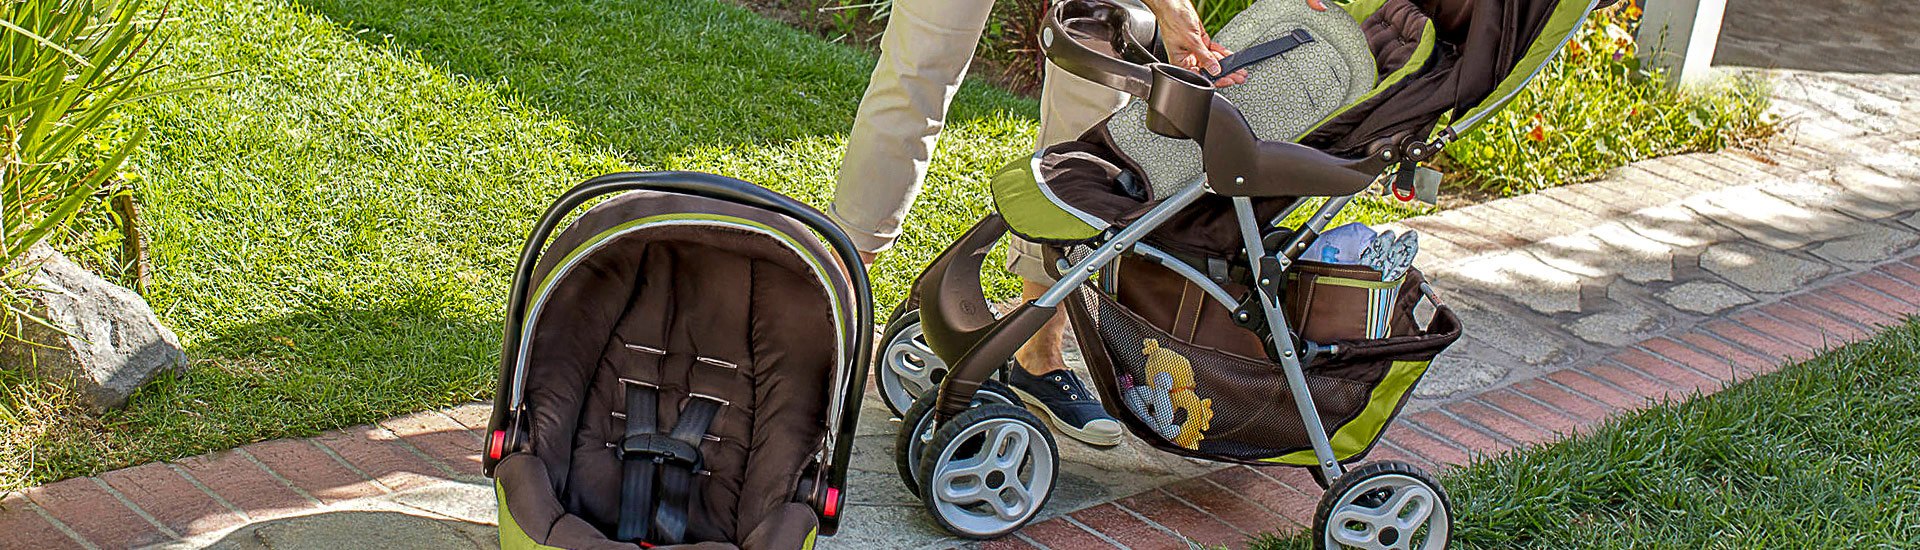 Strollers & Baby Carriers